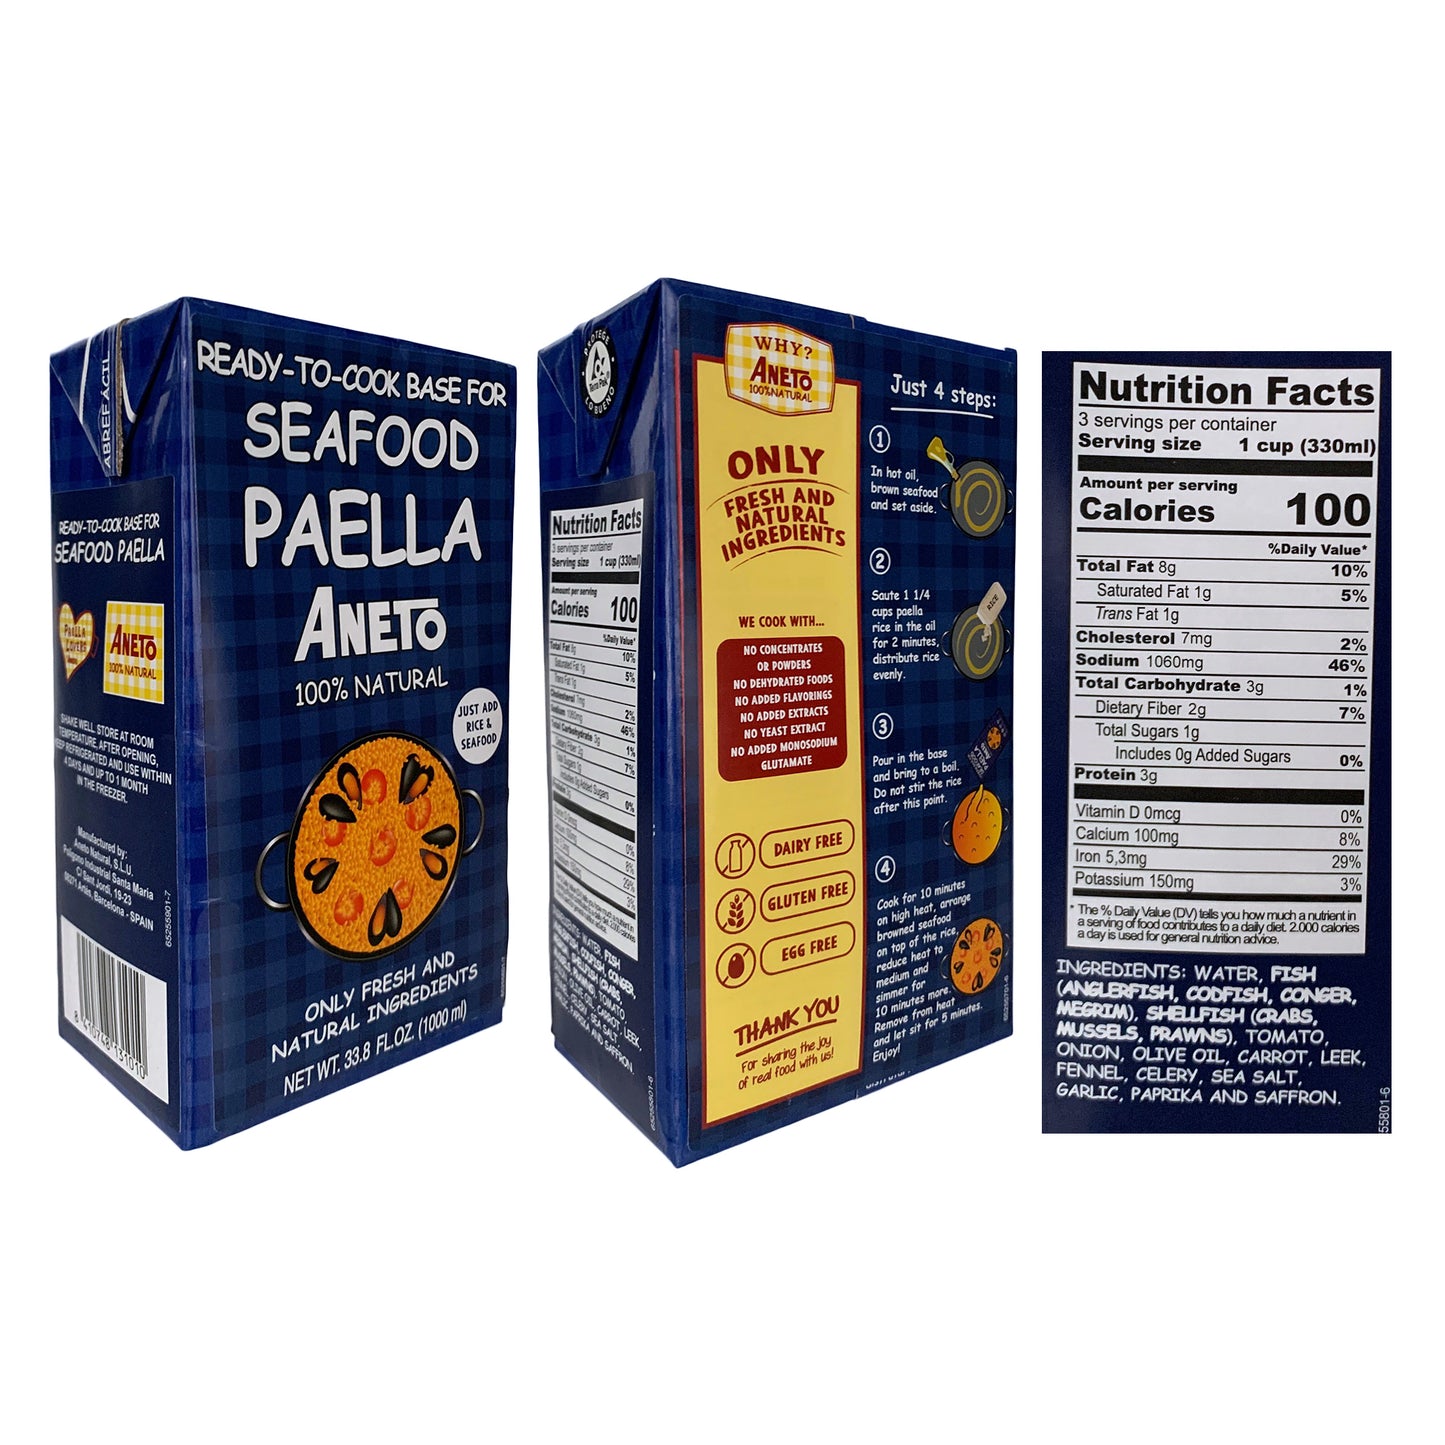 Aneto Ready-to-Cook Base for Seafood Paella 33.8 Fl Oz (1000ml)